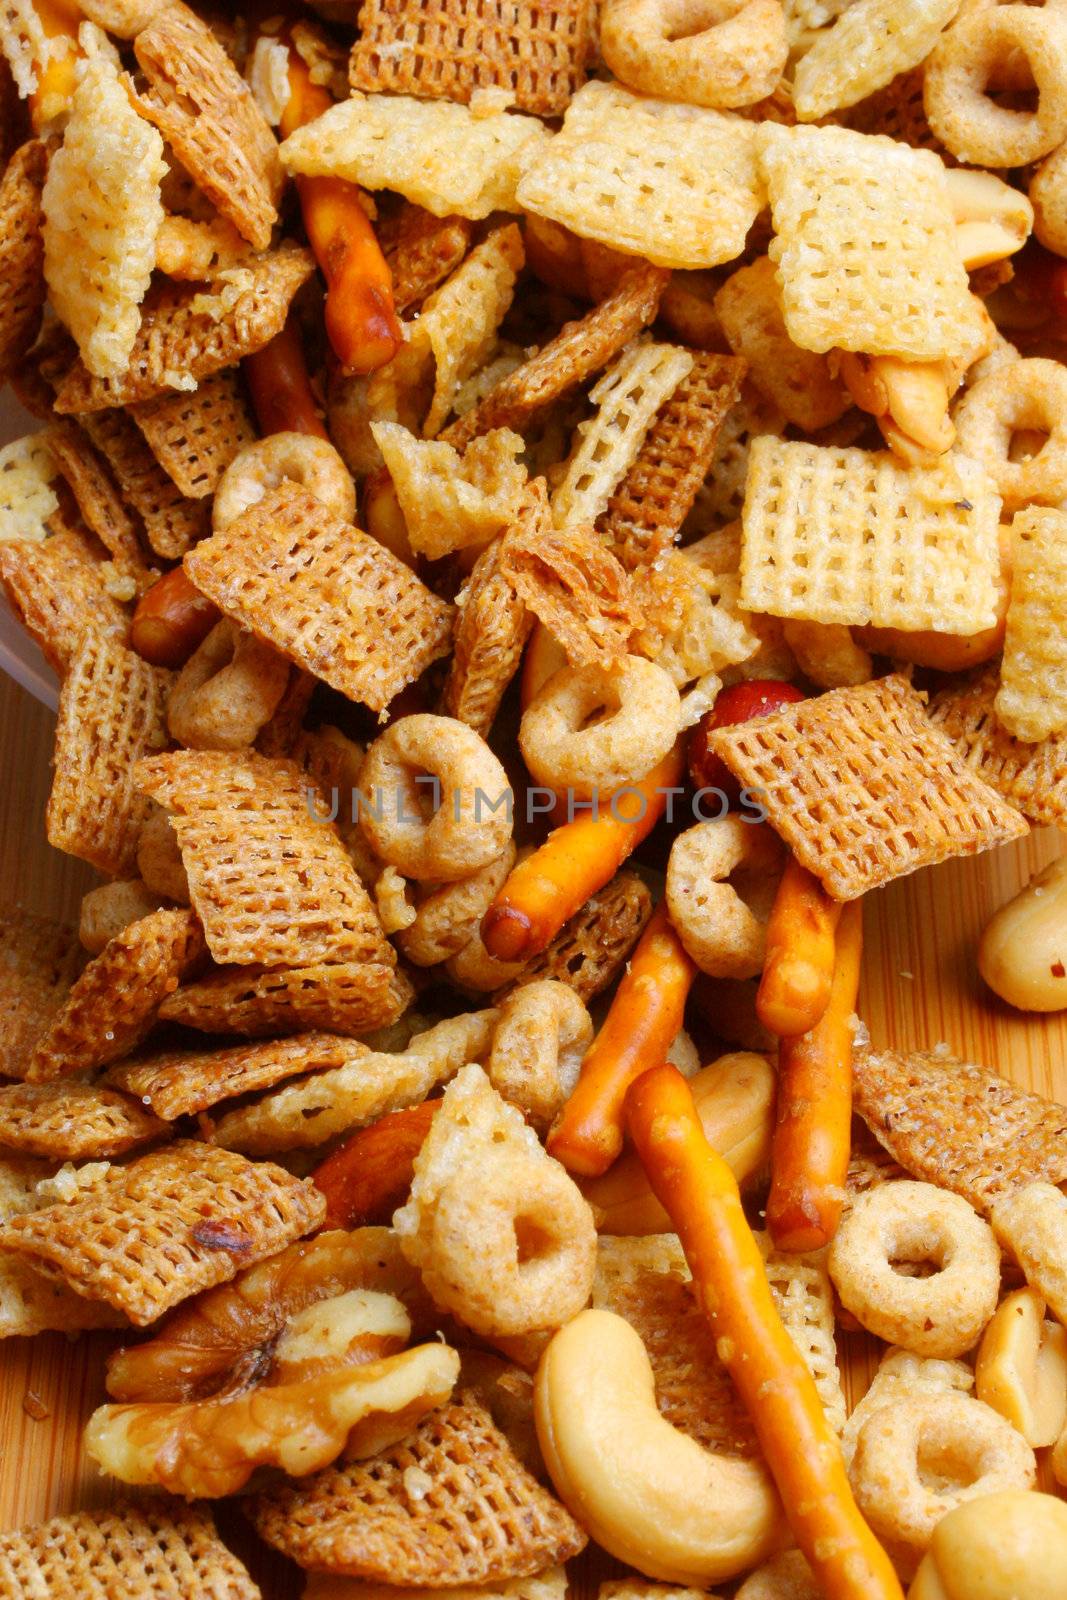 Snack mix by Geoarts